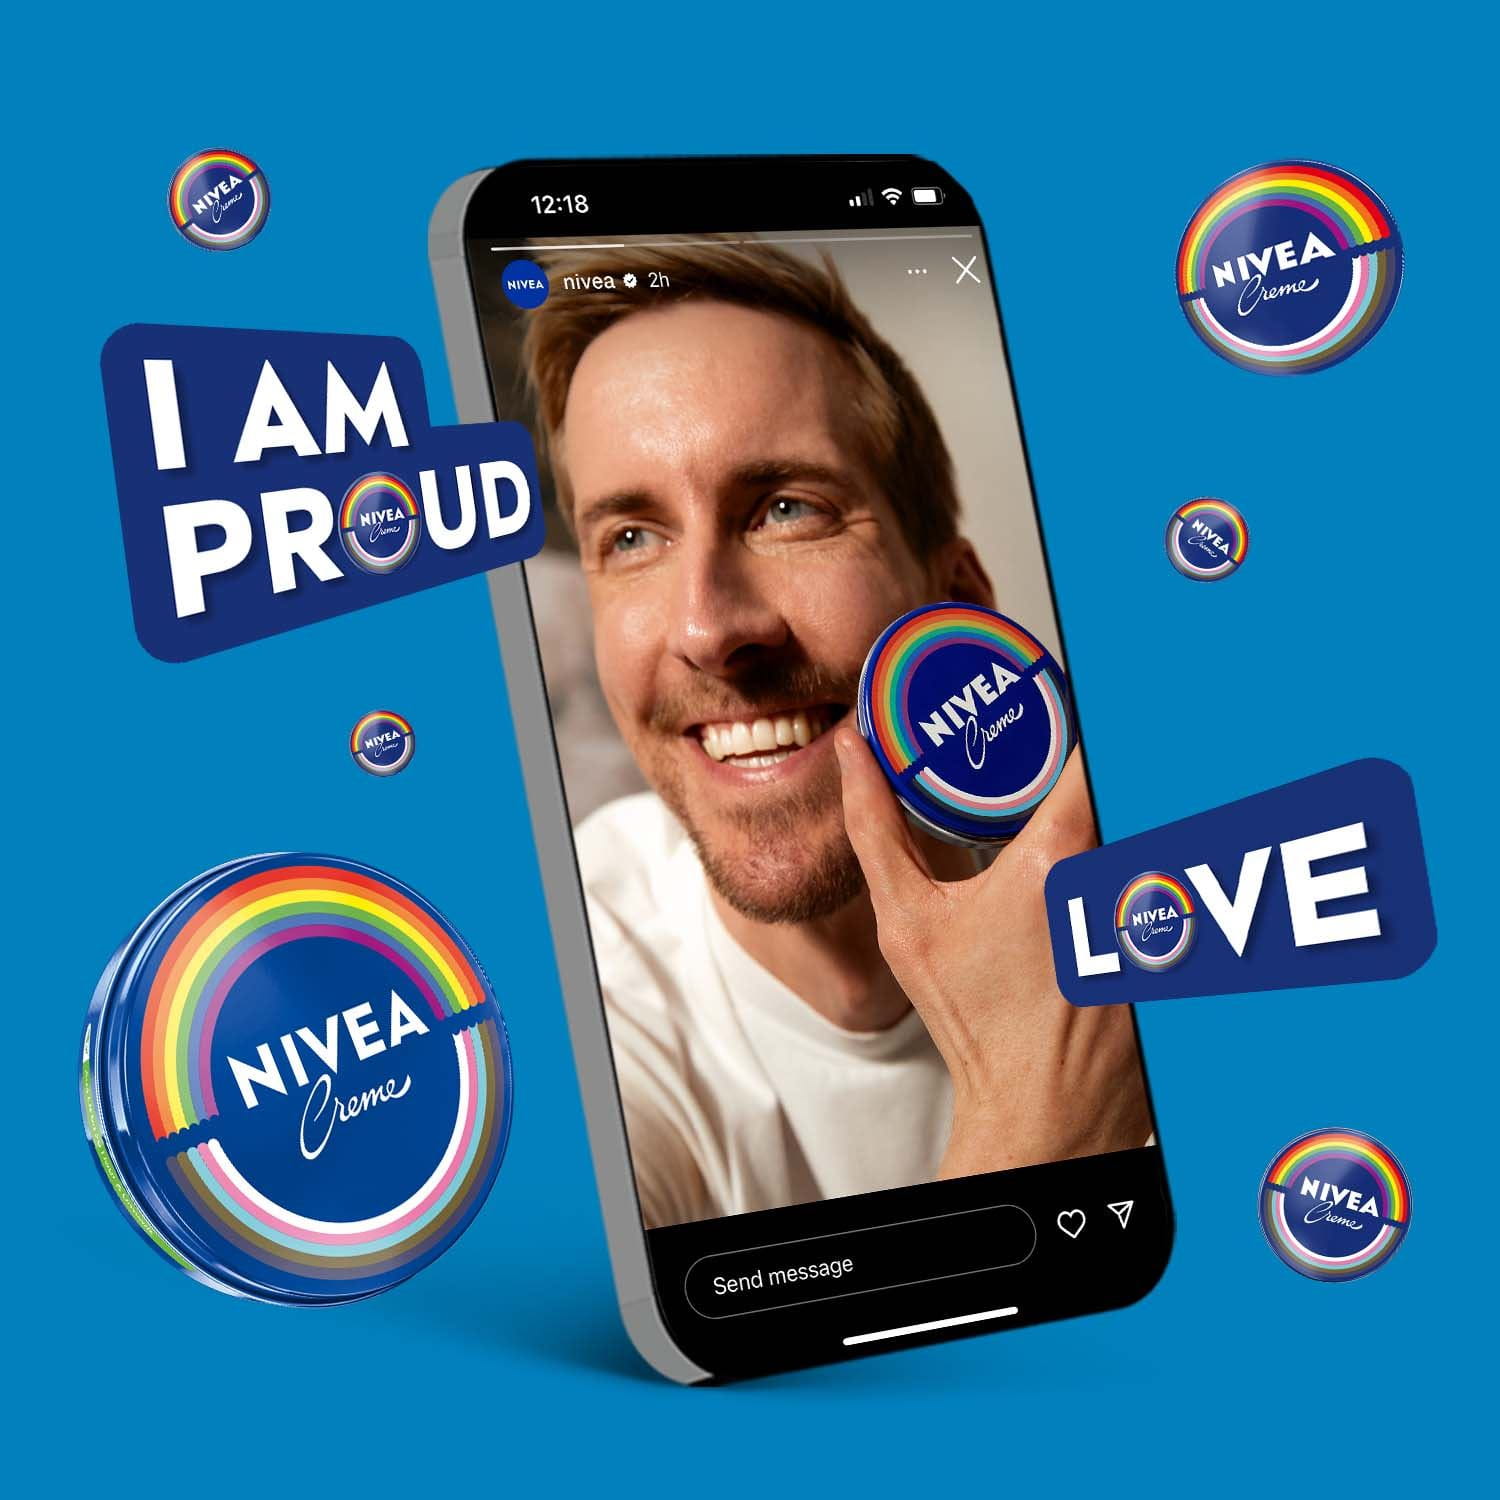 A smartphone shown with a person holding a Pride Limited Edition NIVEA Creme product seen on the screen against a blue background.